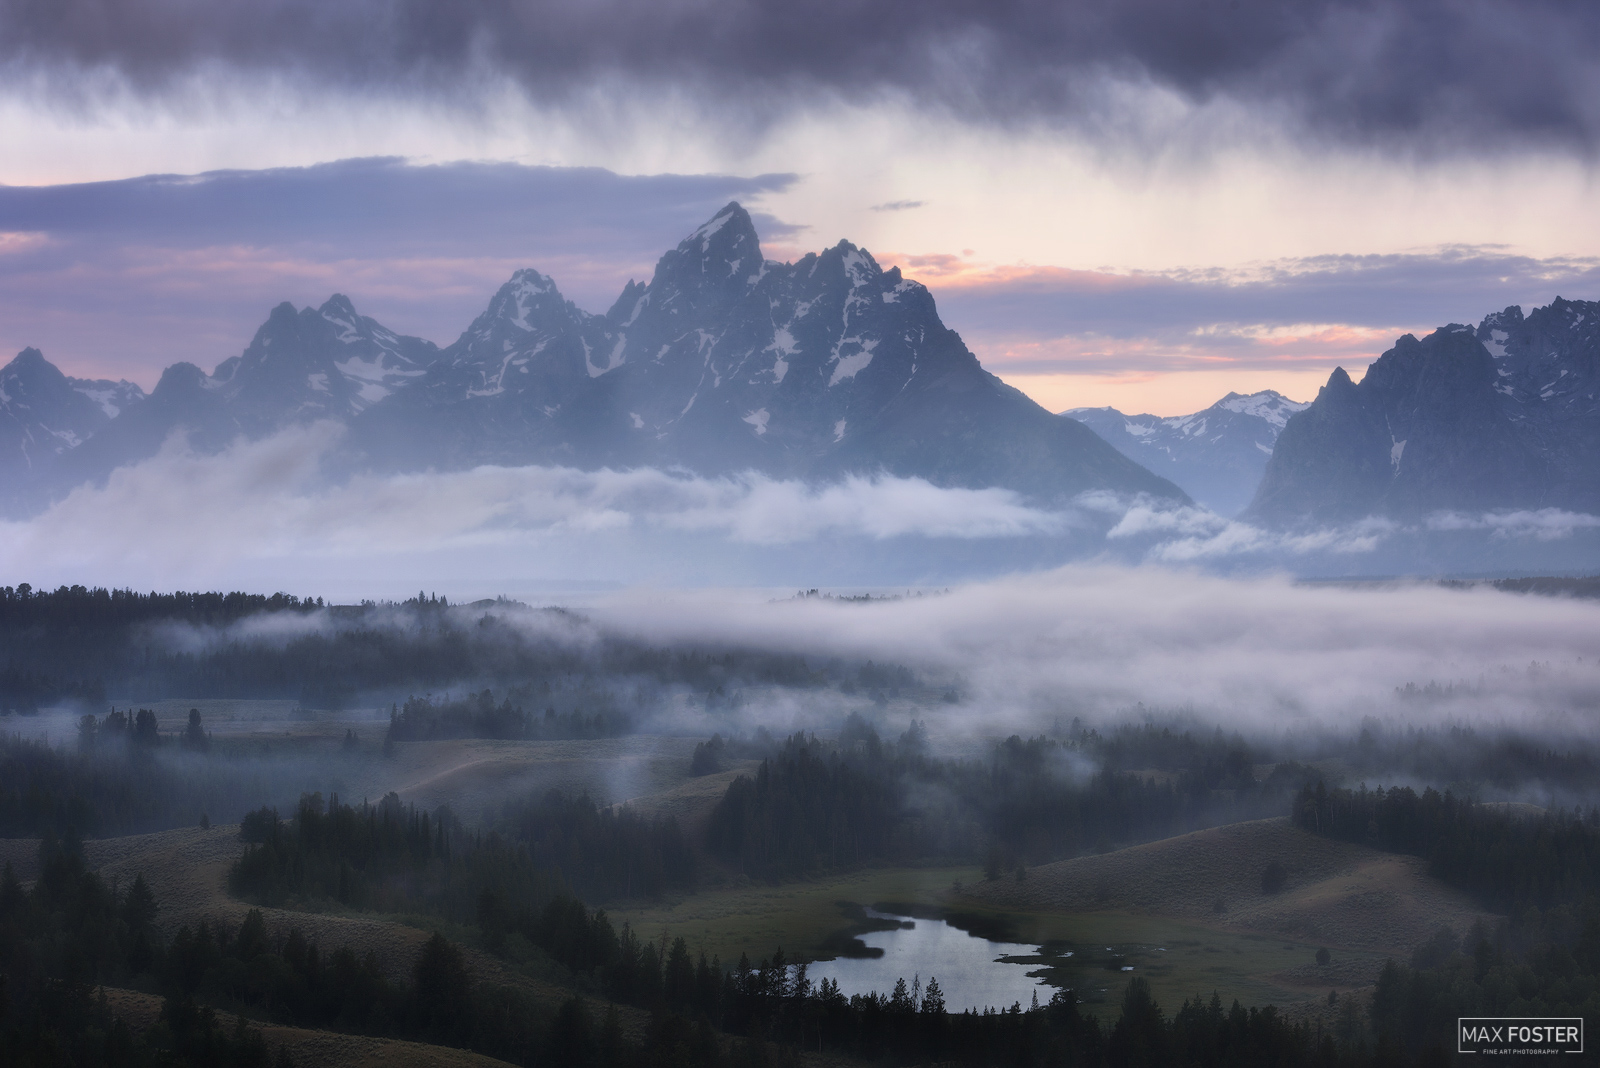 Refresh your space with The Revealing, Max Foster's limited edition photography print of a foggy morning in Grand Teton National...